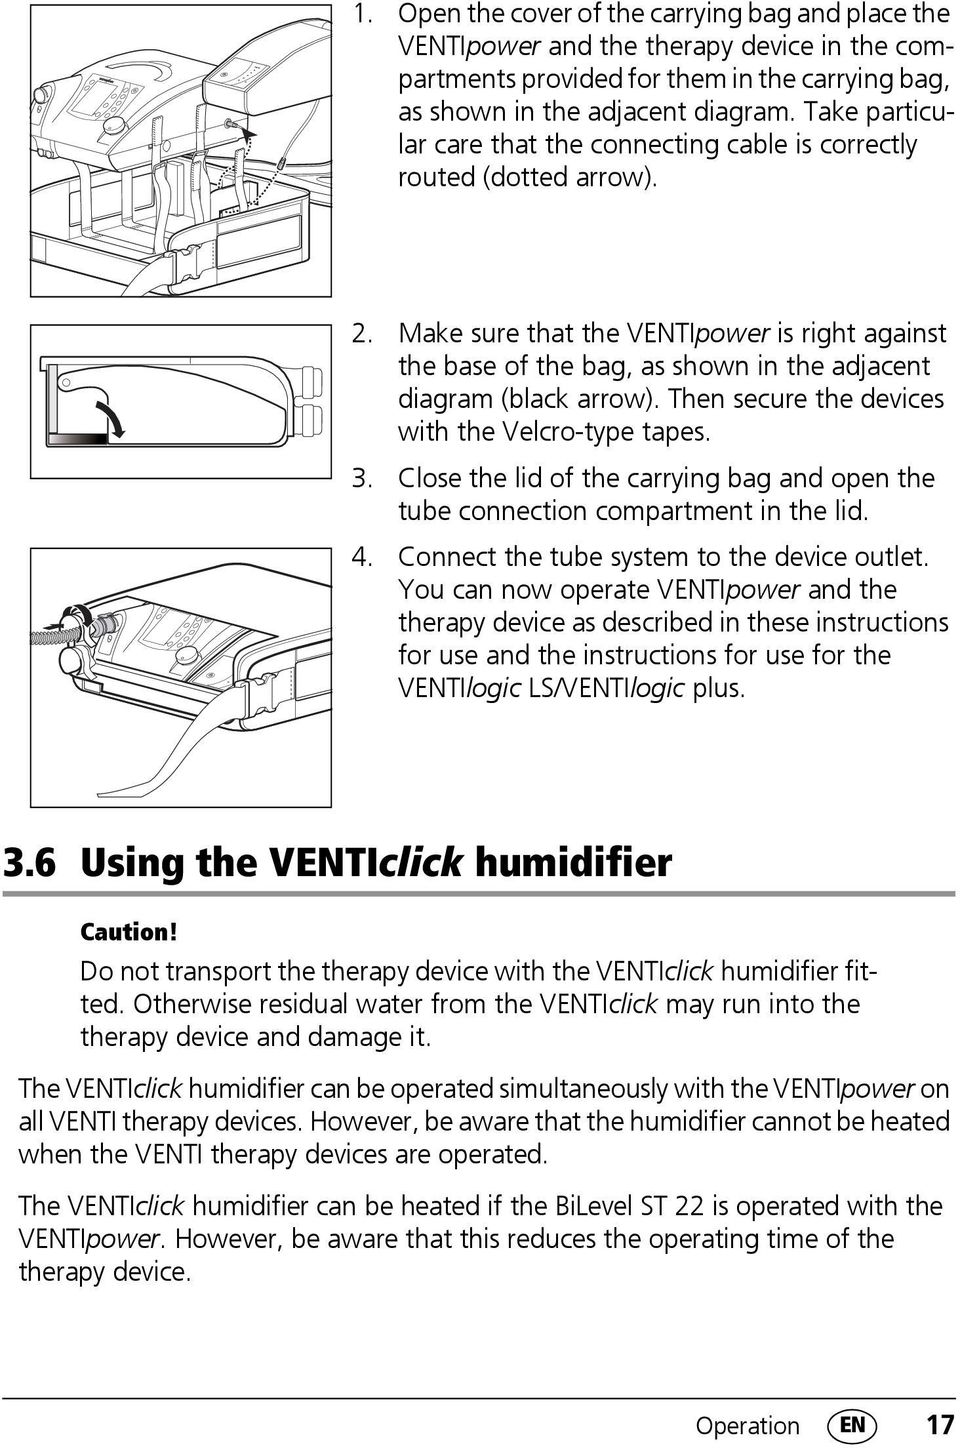 Make sure that the VENTIpower is right against the base of the bag, as shown in the adjacent diagram (black arrow). Then secure the devices with the Velcro-type tapes. 3.